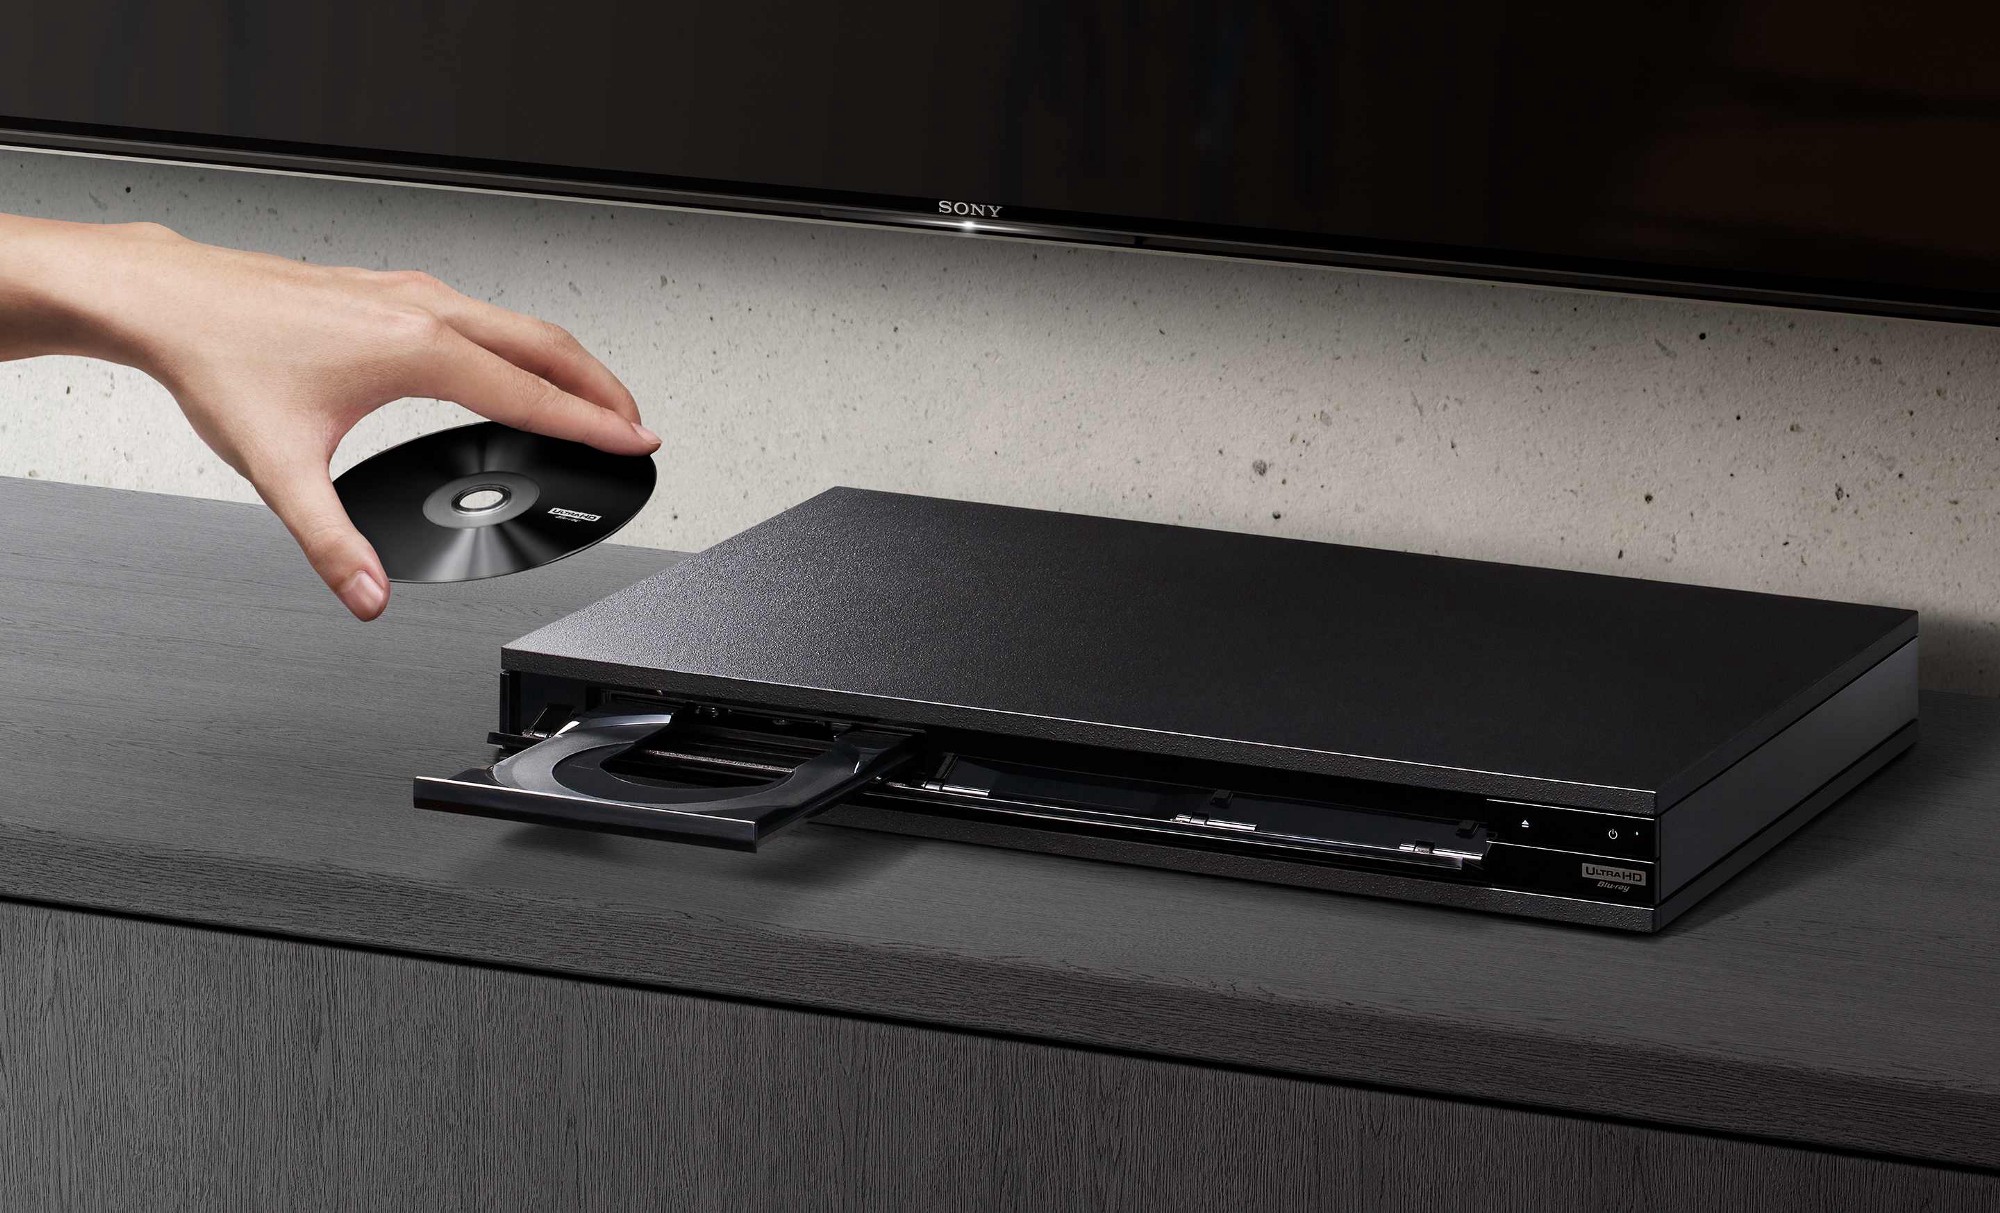 Why I caved and finally bought 4K Blu-ray player | Engadget